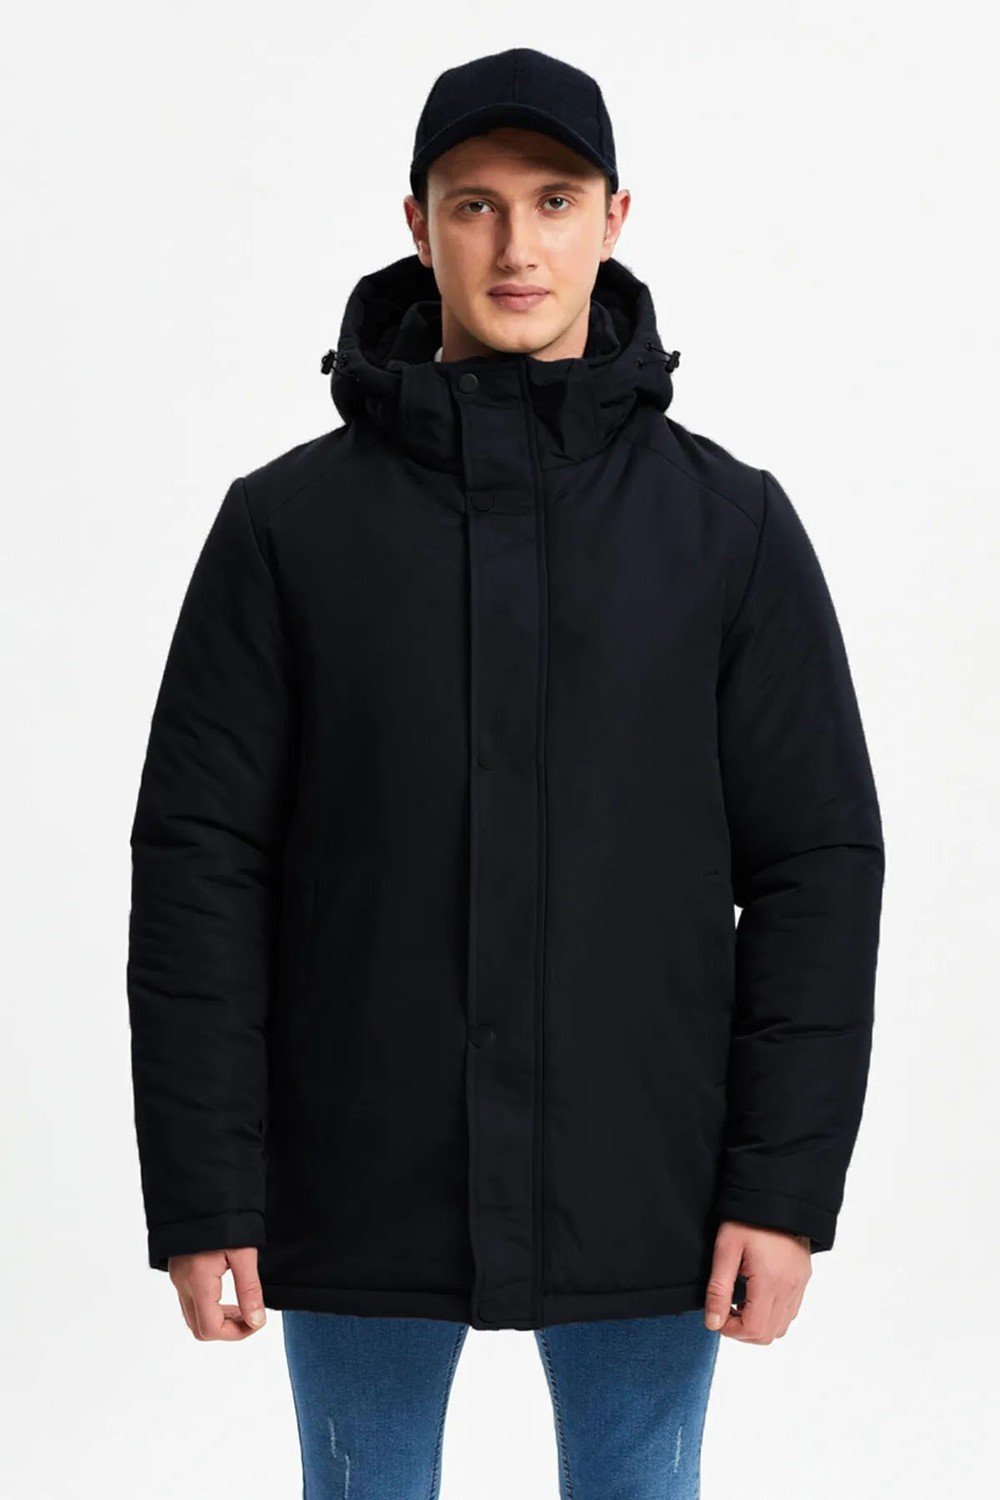 D1fference Men's Black Lined Winter Coat & Coat & Parka, Water and Windproof with Detachable Hood.